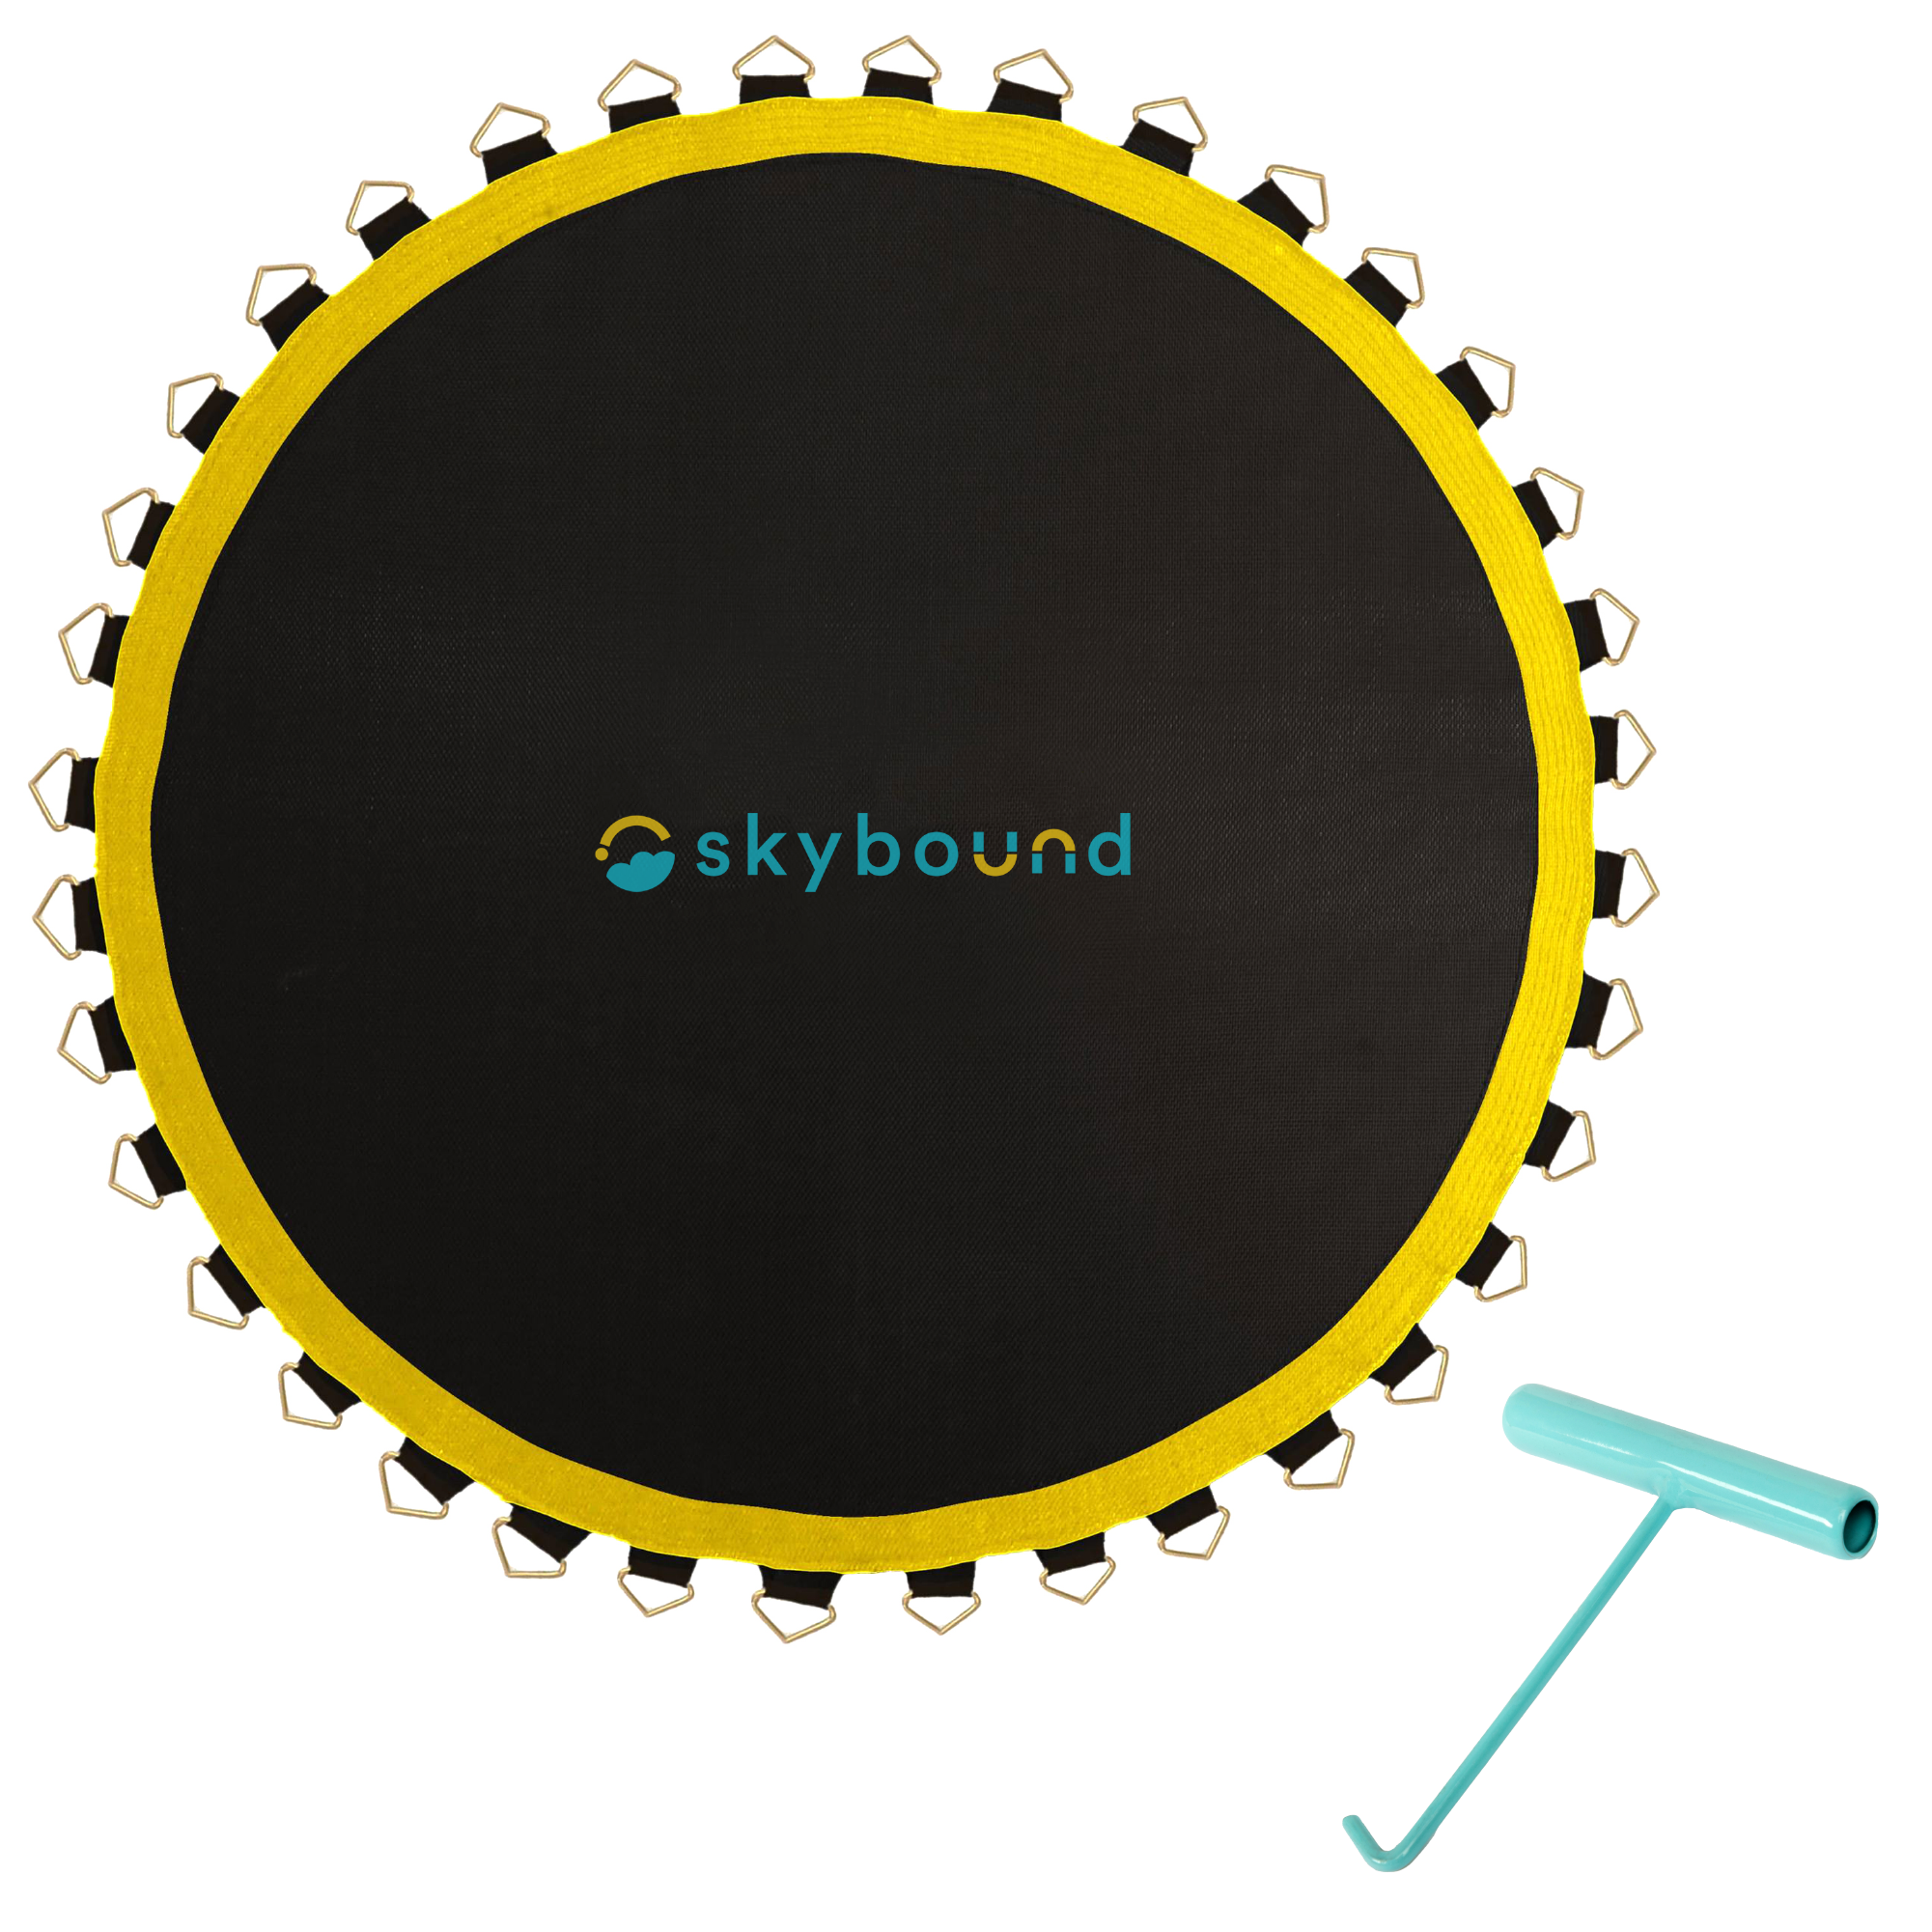 Premium Replacement Mat for 14ft Trampolines - 144in / 96 V-Rings / 8.5in Springs